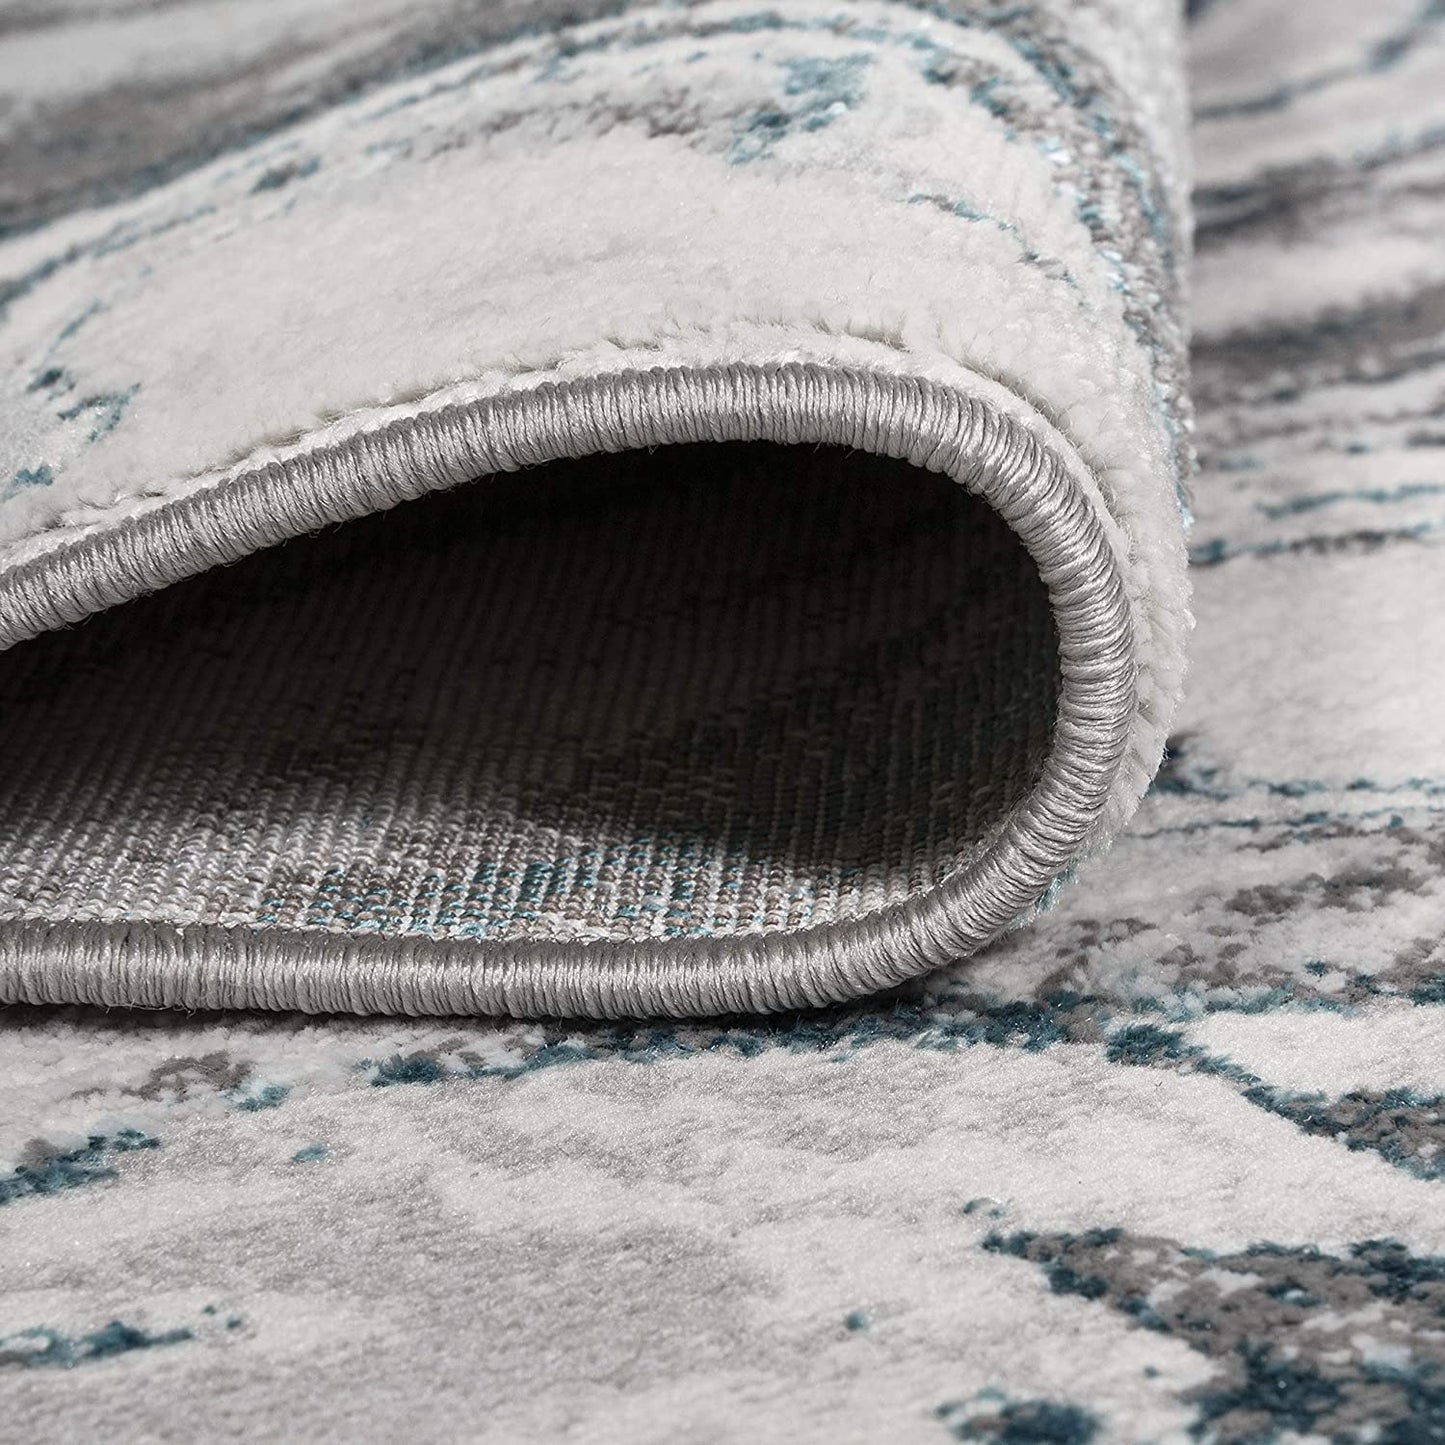 Swirl Marbled Abstract Gray/Turquoise Soft Rug